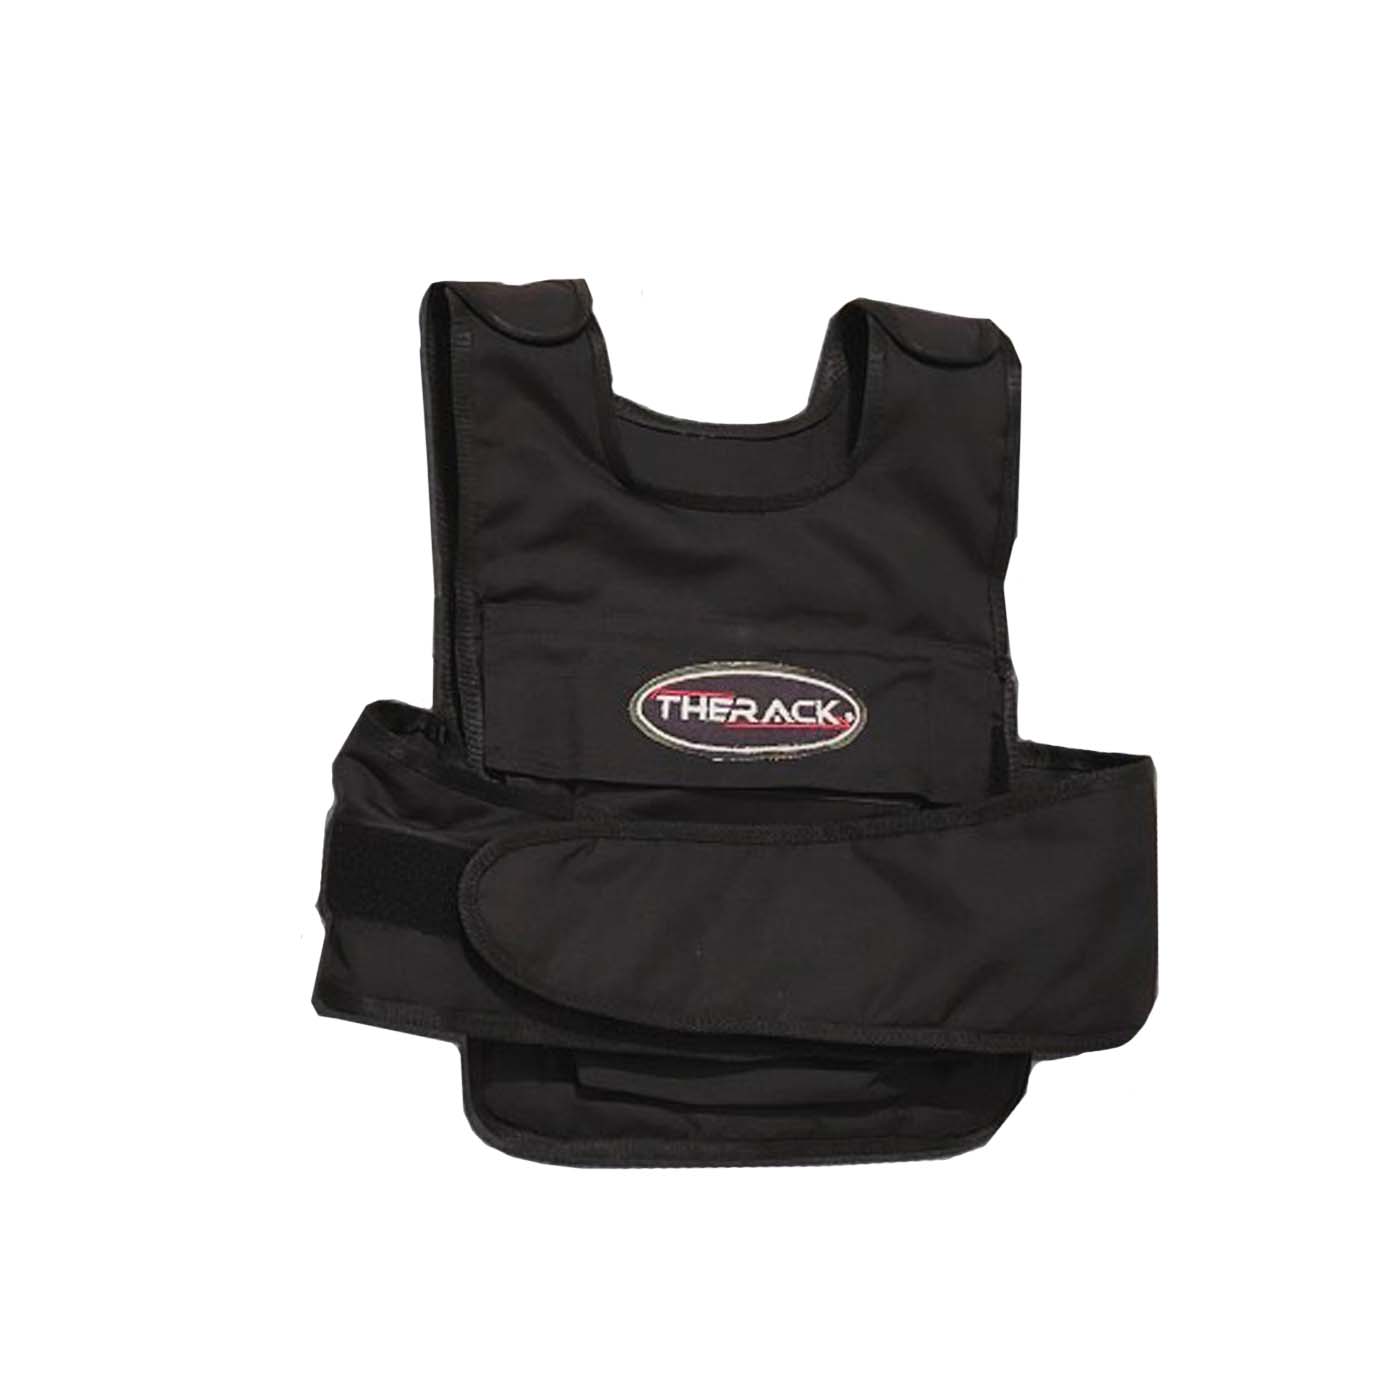 Weighted RUK Vest